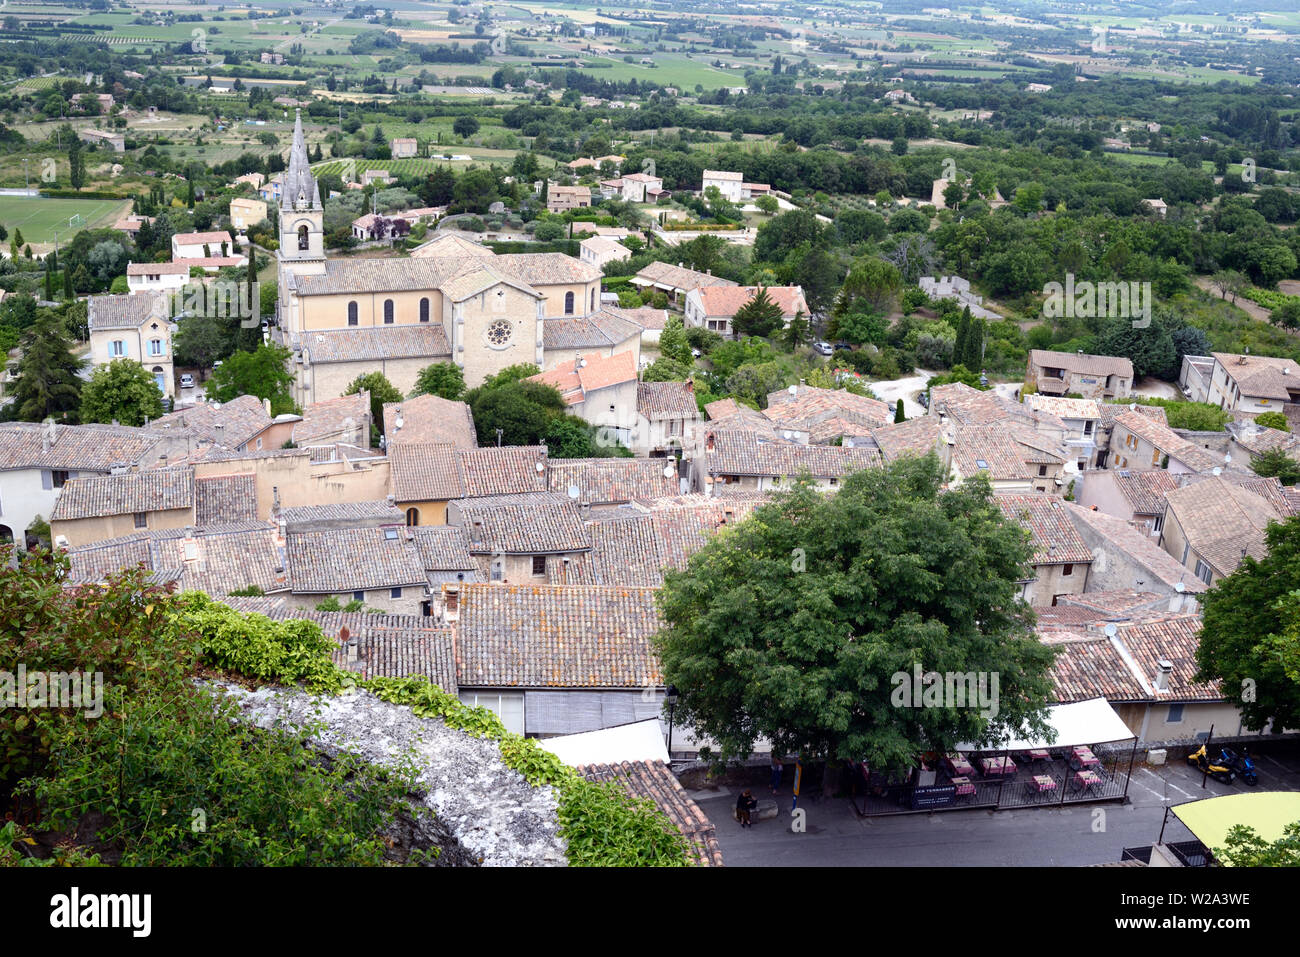 Aerial View or High Angle View over the Rooftops of the Hill Village or Perched Village of Bonnieux in the Luberon Regional Park Vaucluse Provence Stock Photo